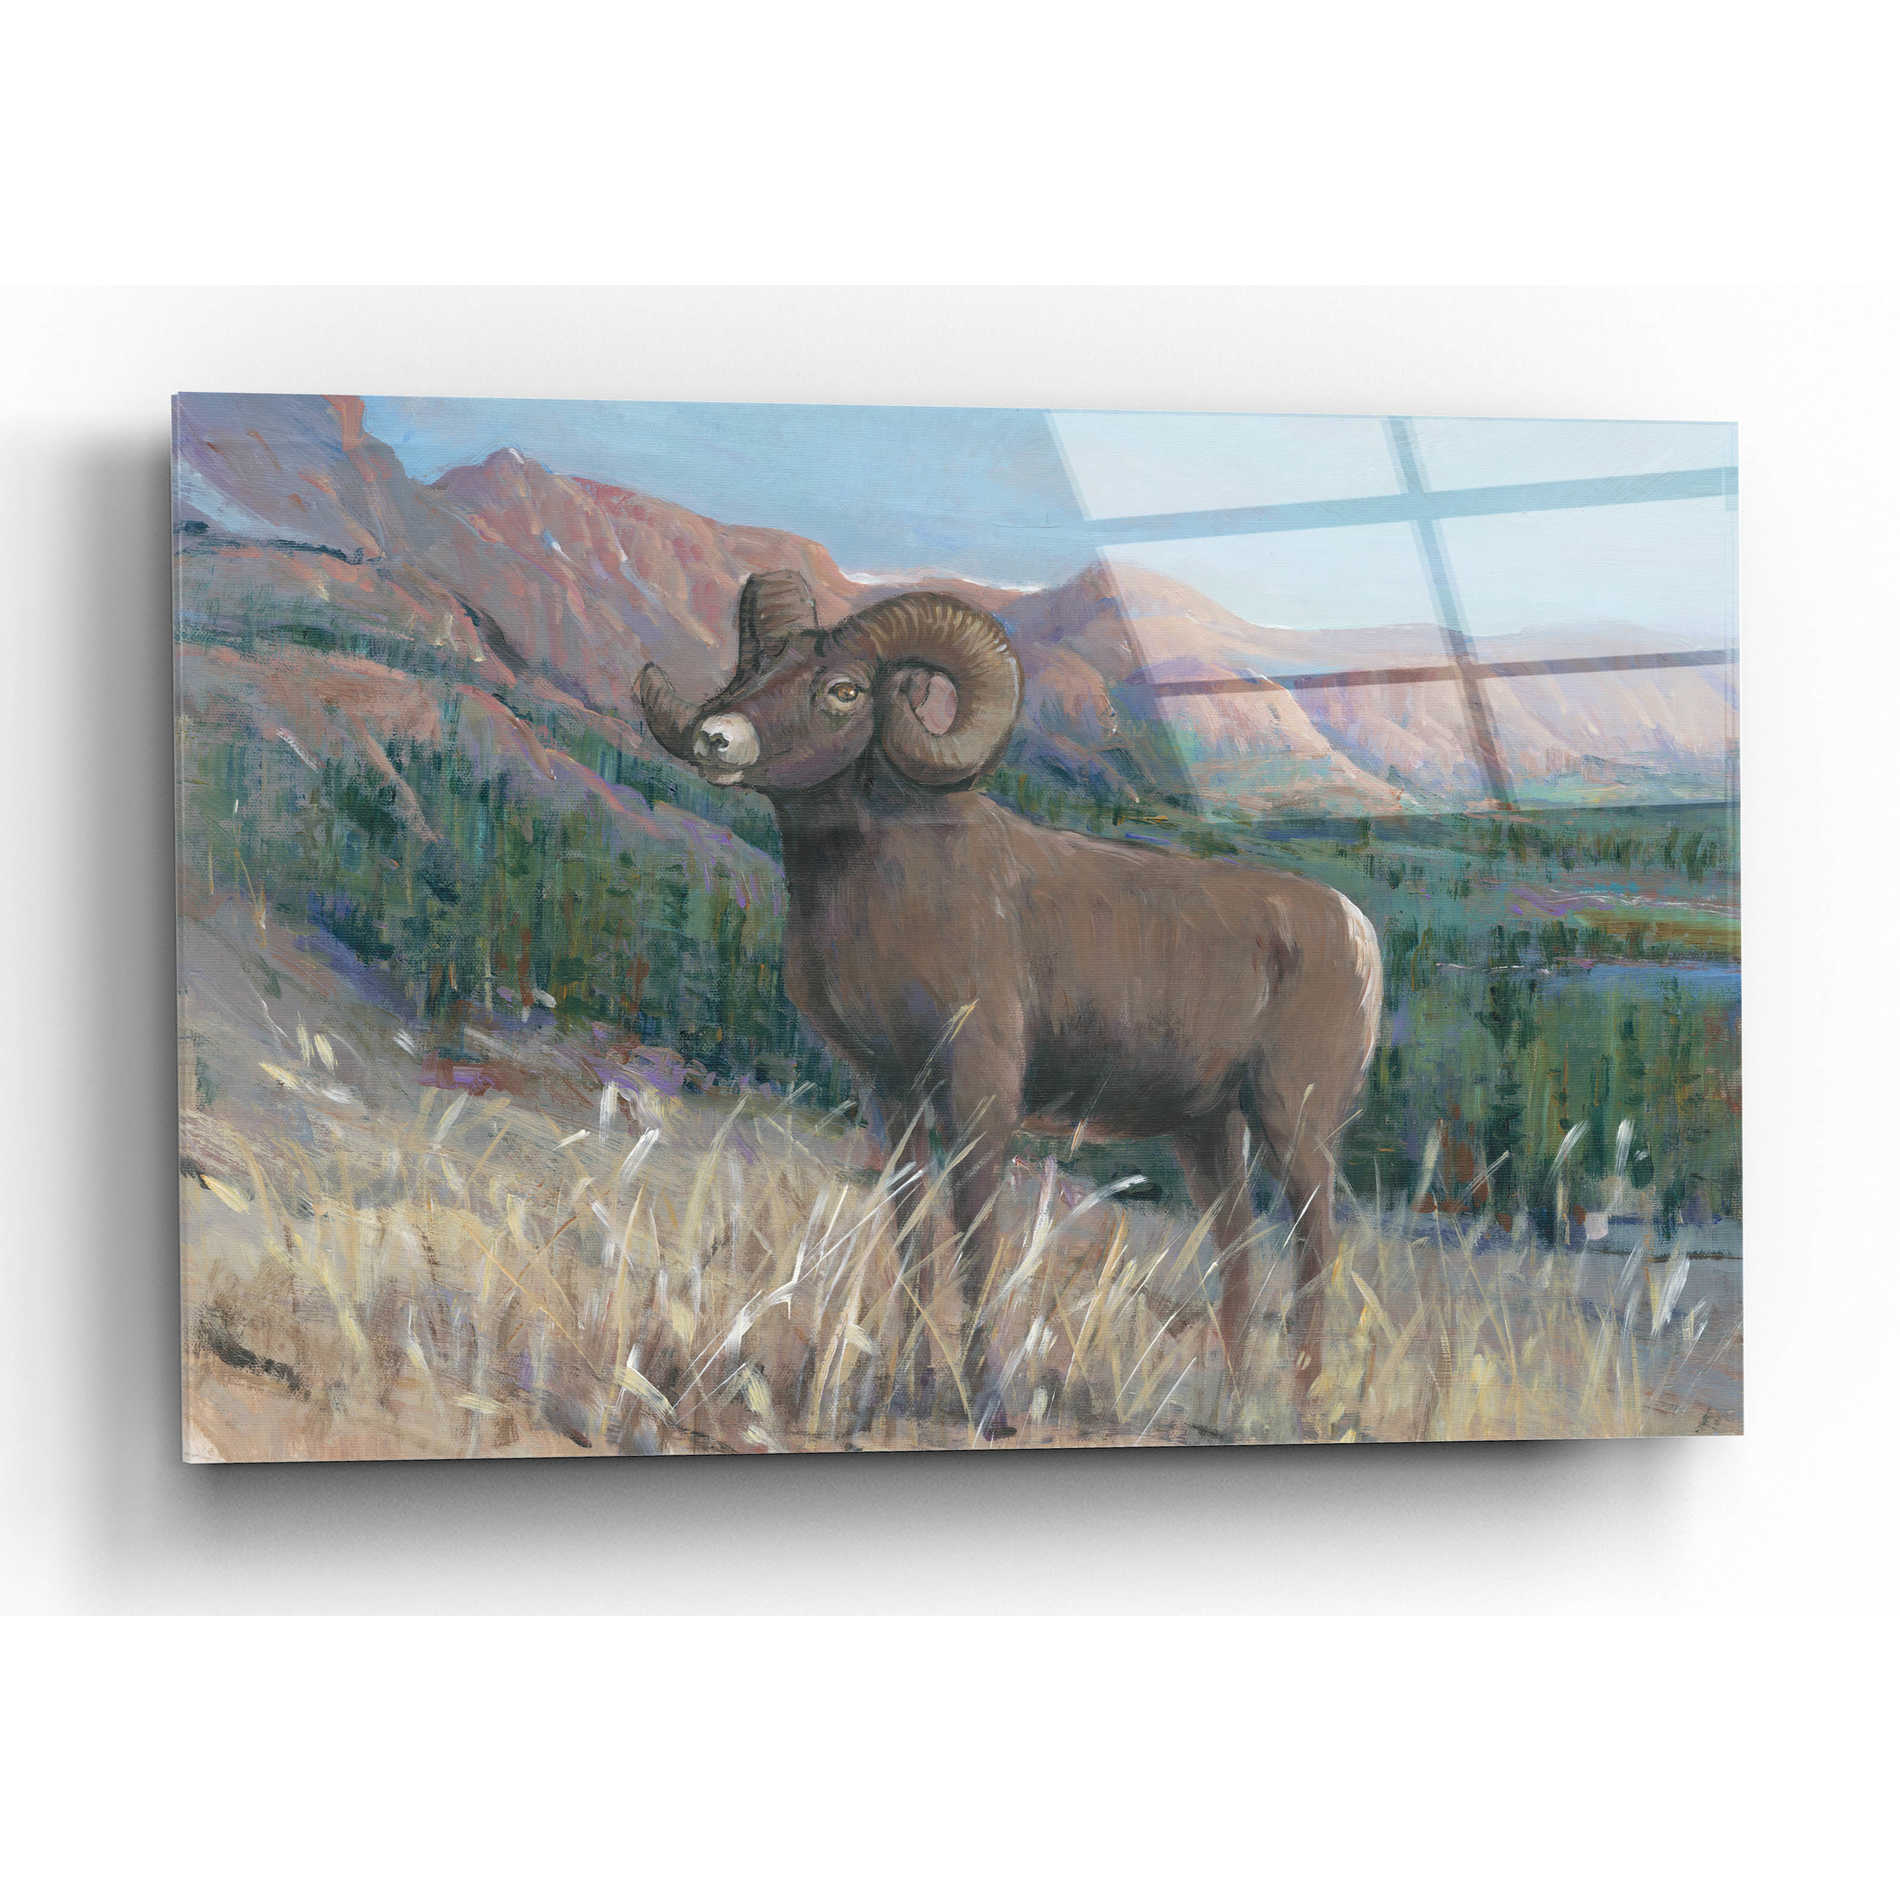 Epic Art 'Animals of the West IV' by Tim O'Toole, Acrylic Glass Wall Art,16x12